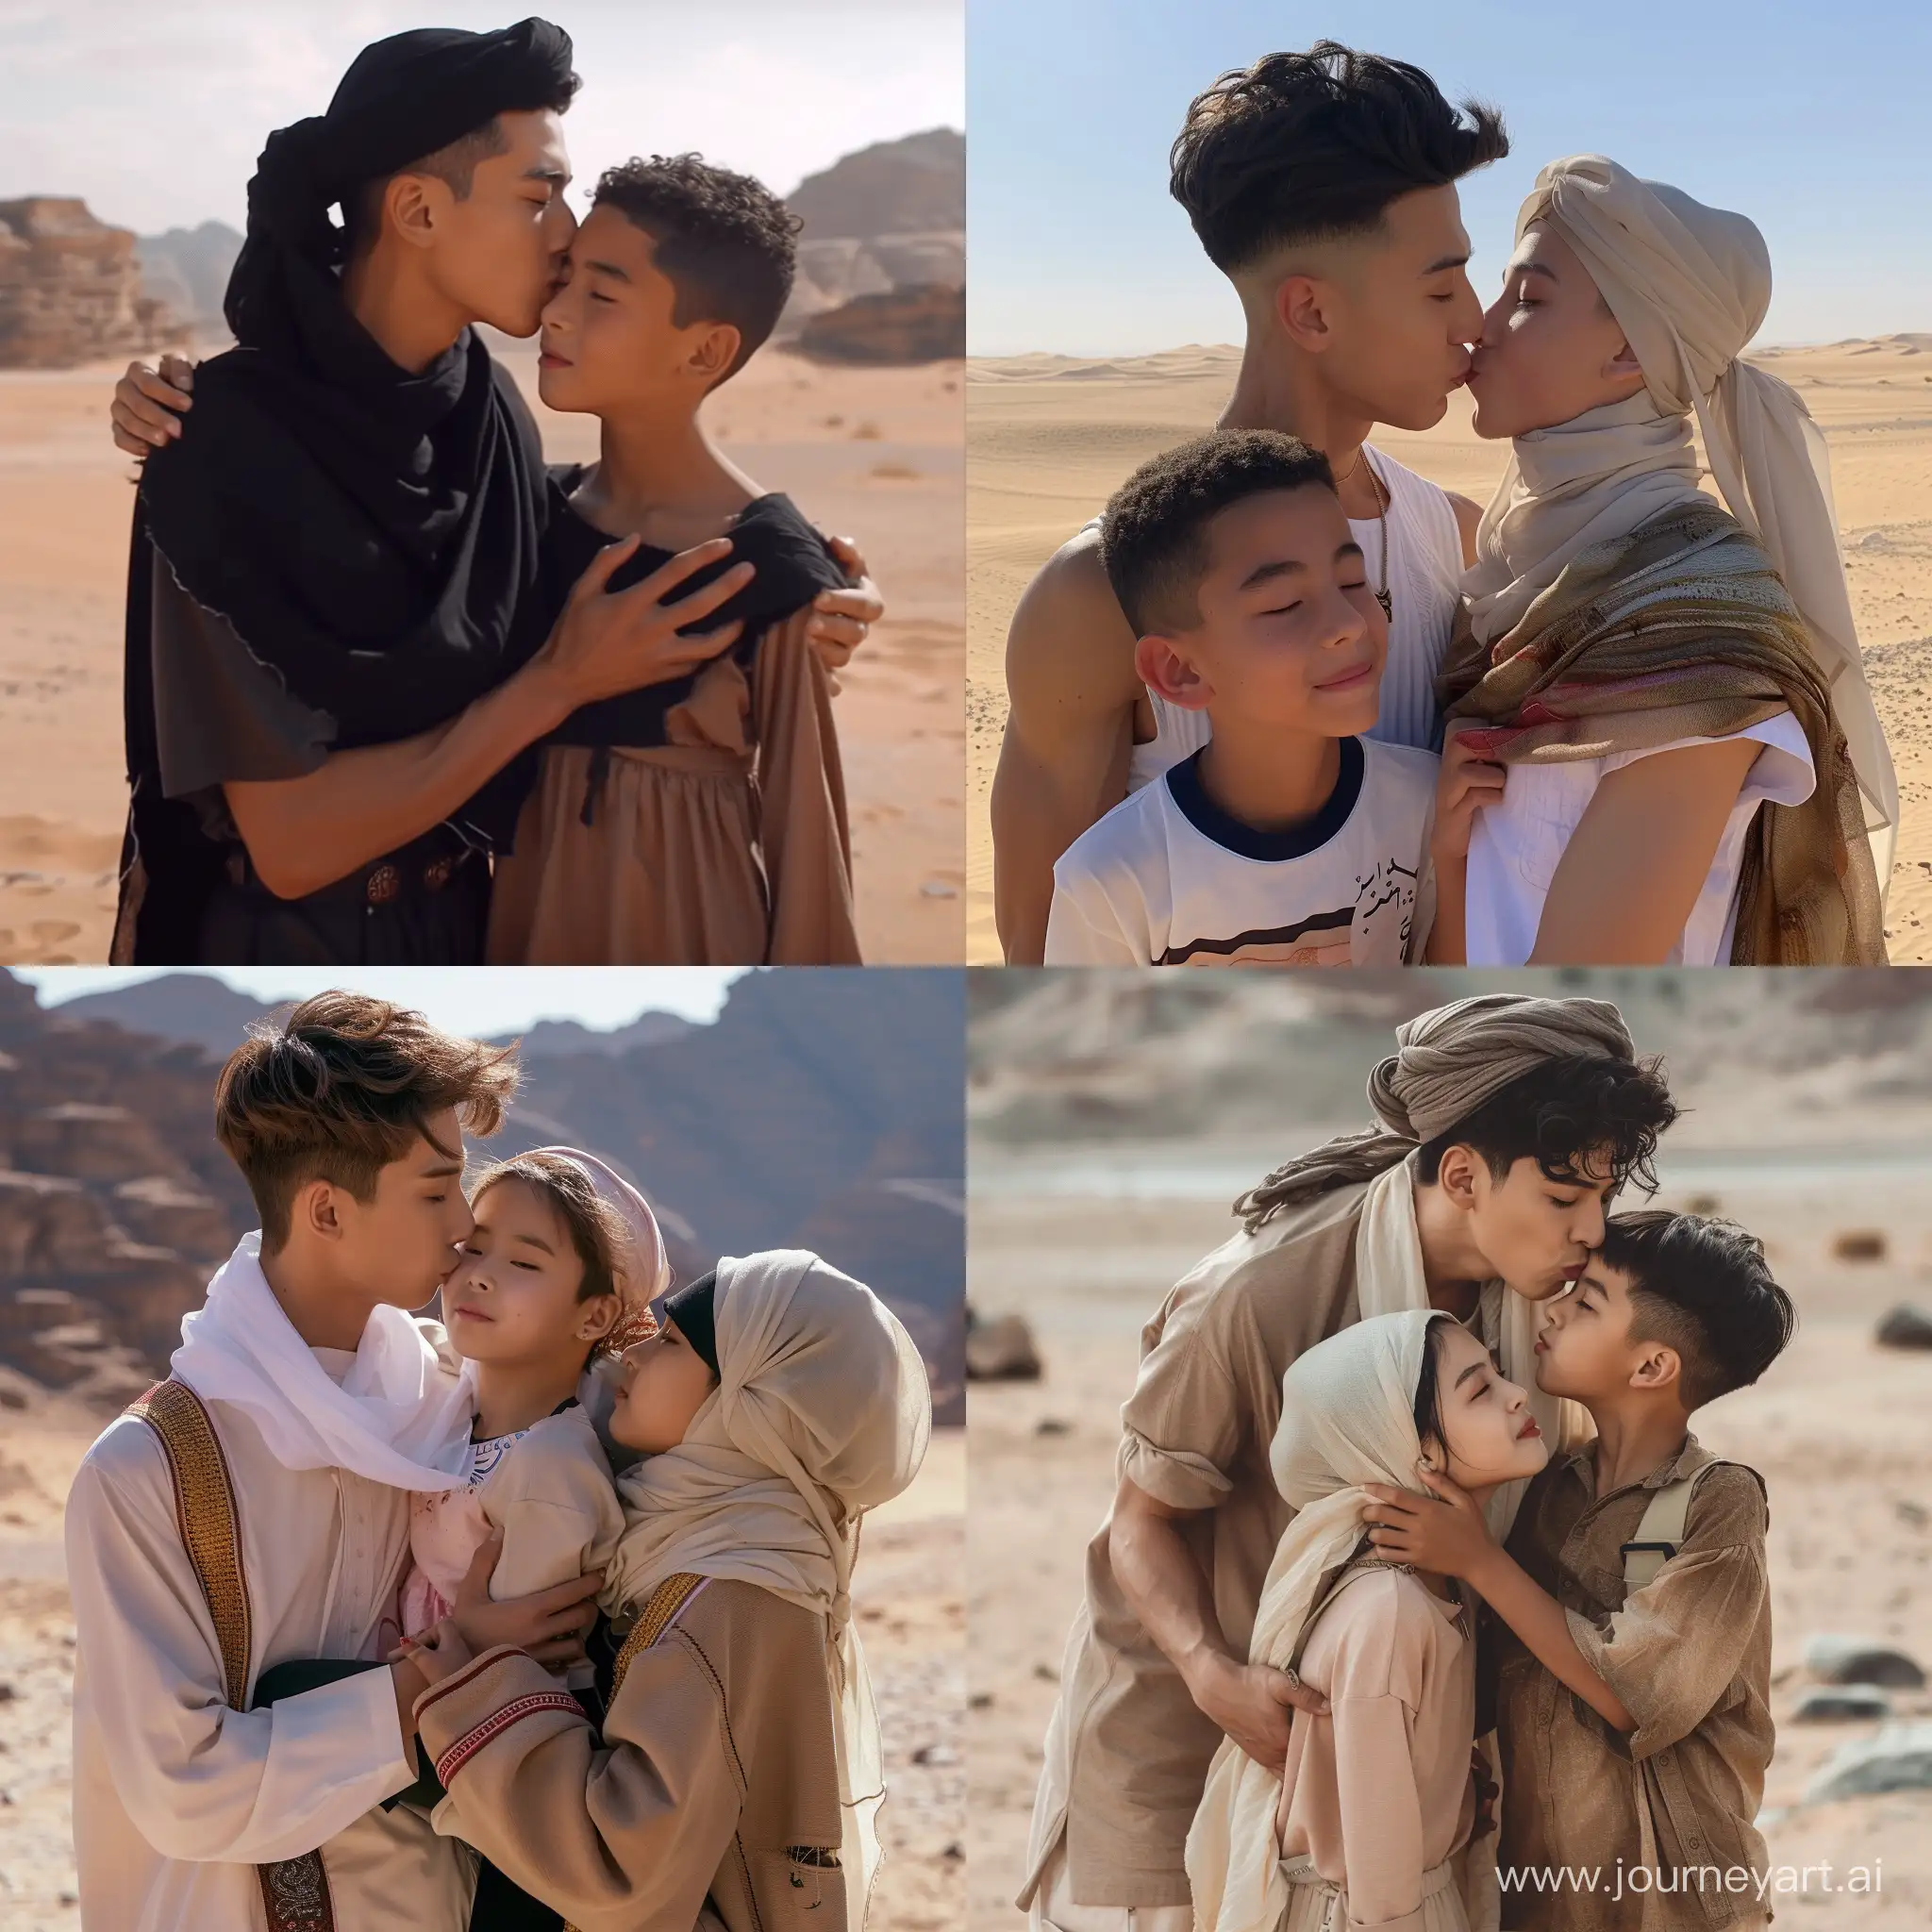 Muscular-Kpop-Idol-Kisses-and-Carries-Short-Arab-Girl-and-Boy-in-Desert